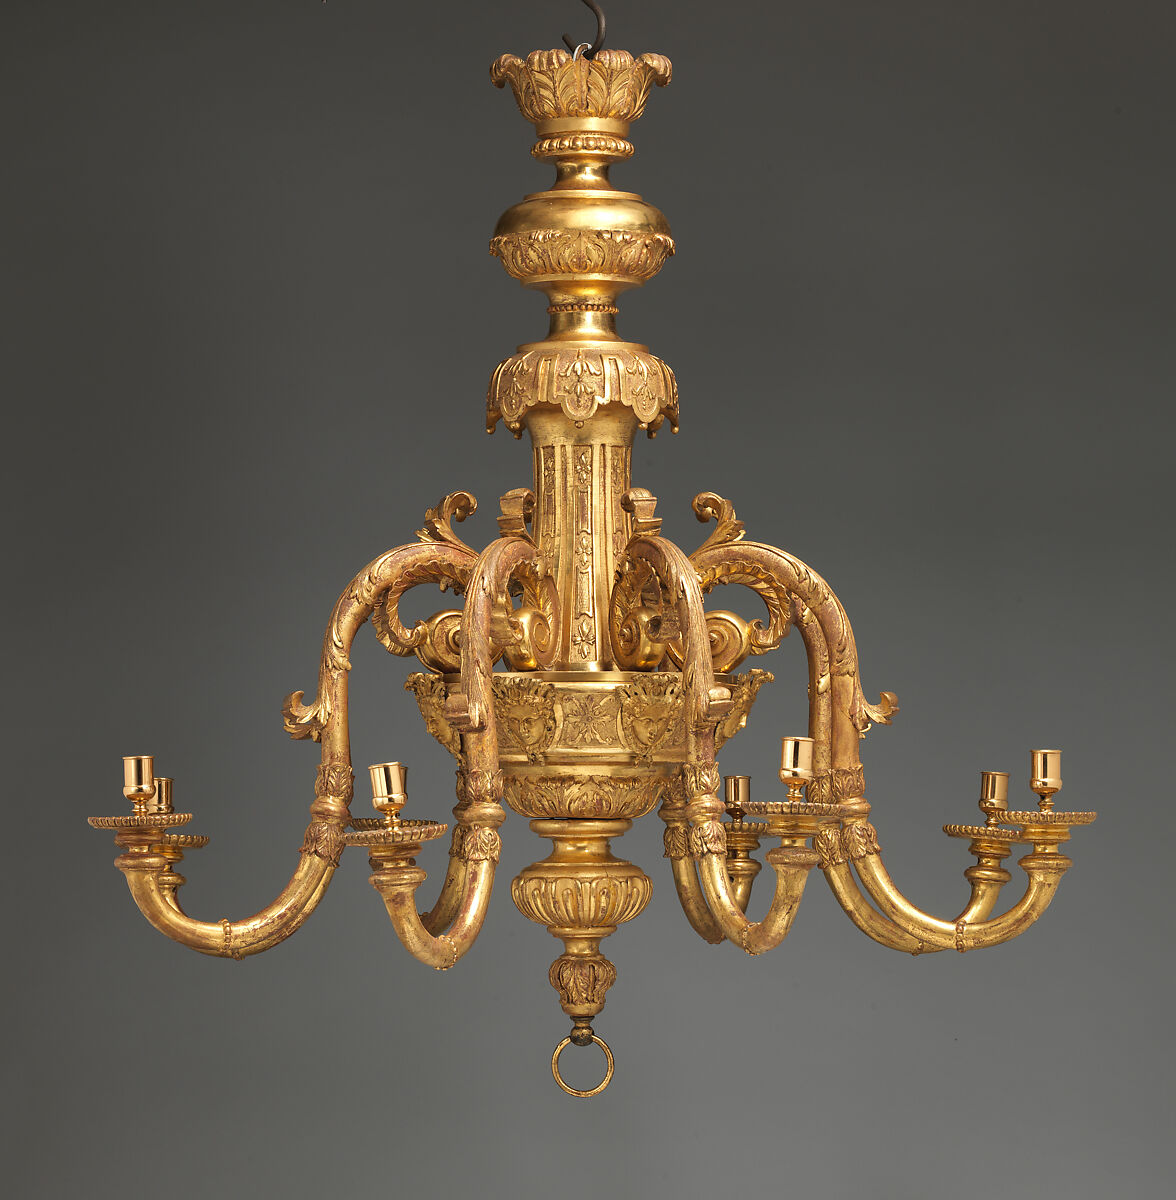 Chandelier, Attributed to John Gumley (British, ca. 1670–1726), Gilded wood and gesso; gilded metal mounts, British 